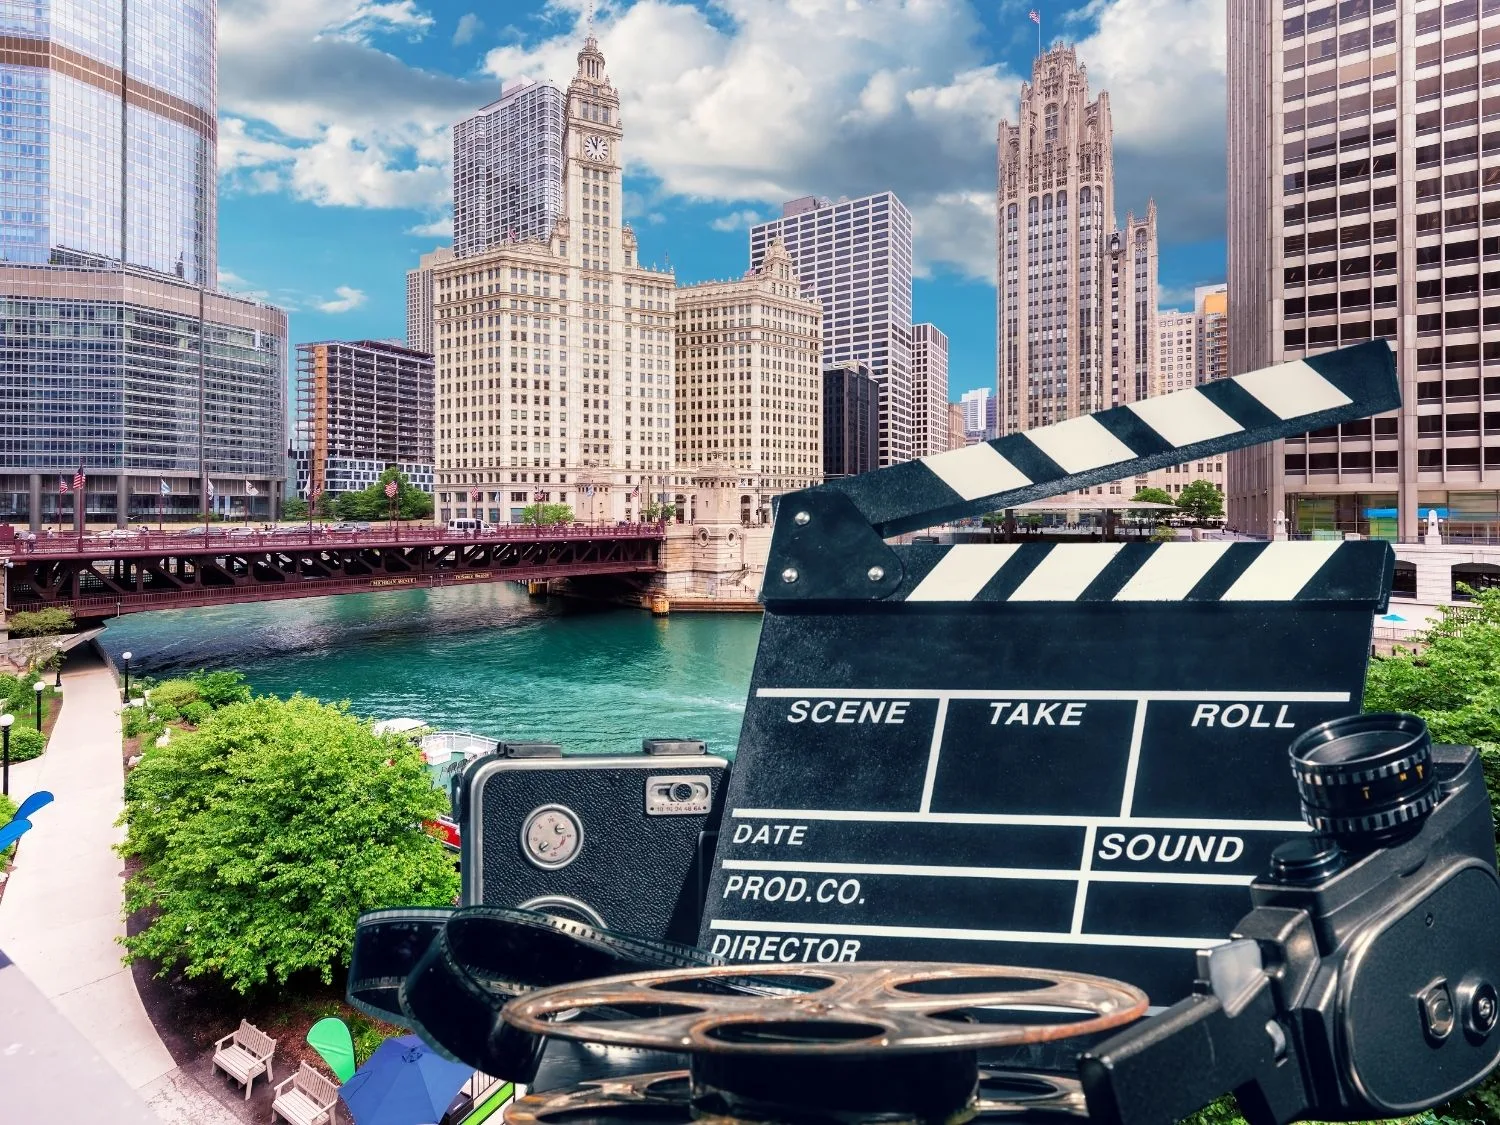 12 Extraordinary Movies Set In Chicago That Will Inspire You To Visit!